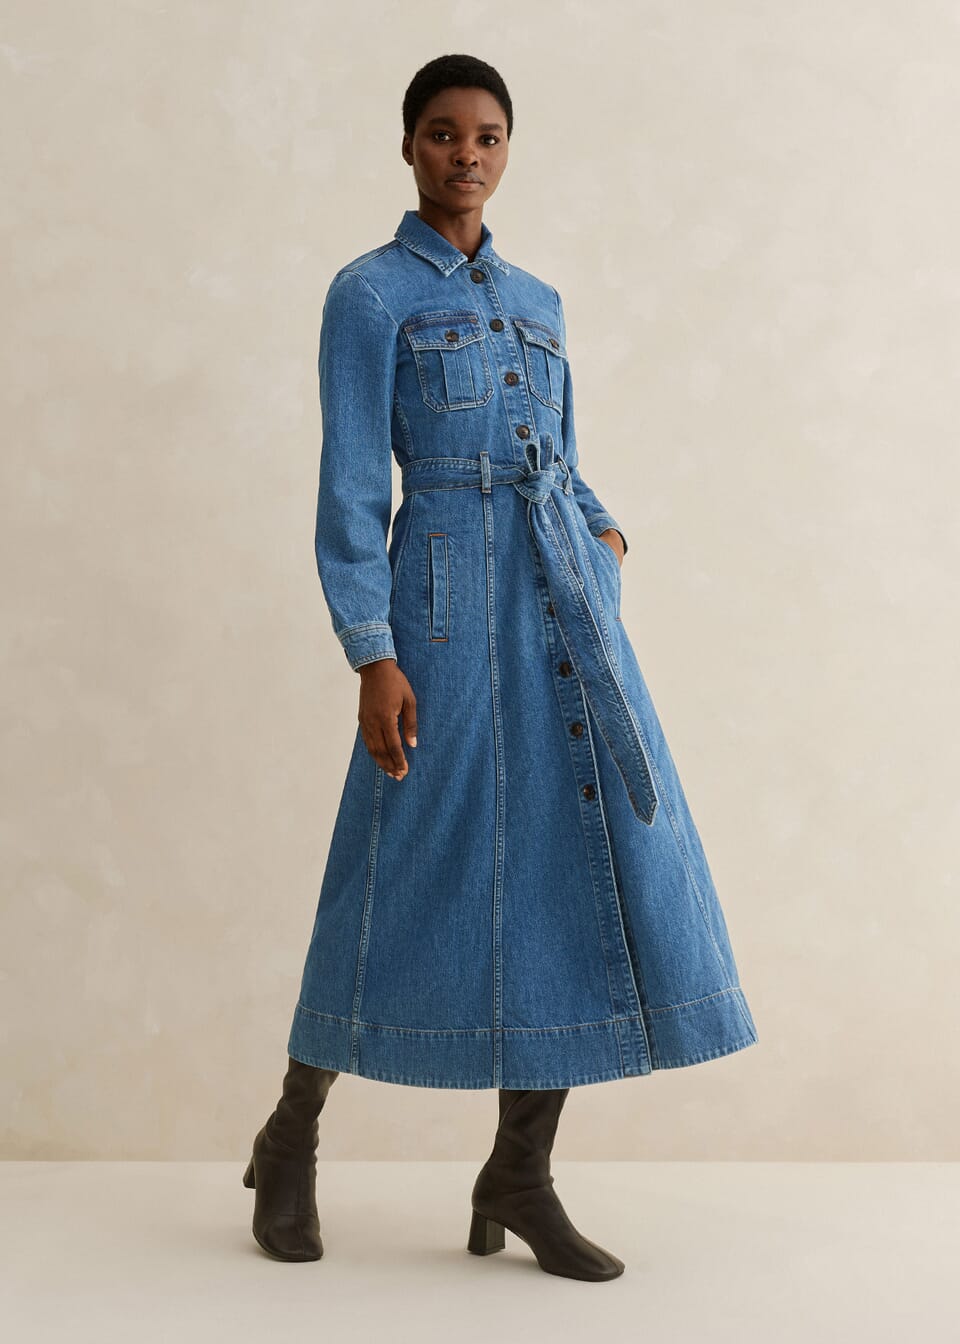 This Me + Em  denim midi dress is a versatile autumn investment, this denim dress is shaped to a midi length and features a line of buttons through the centre to adjust the neckline and accommodate base layers when temperatures start to drop.